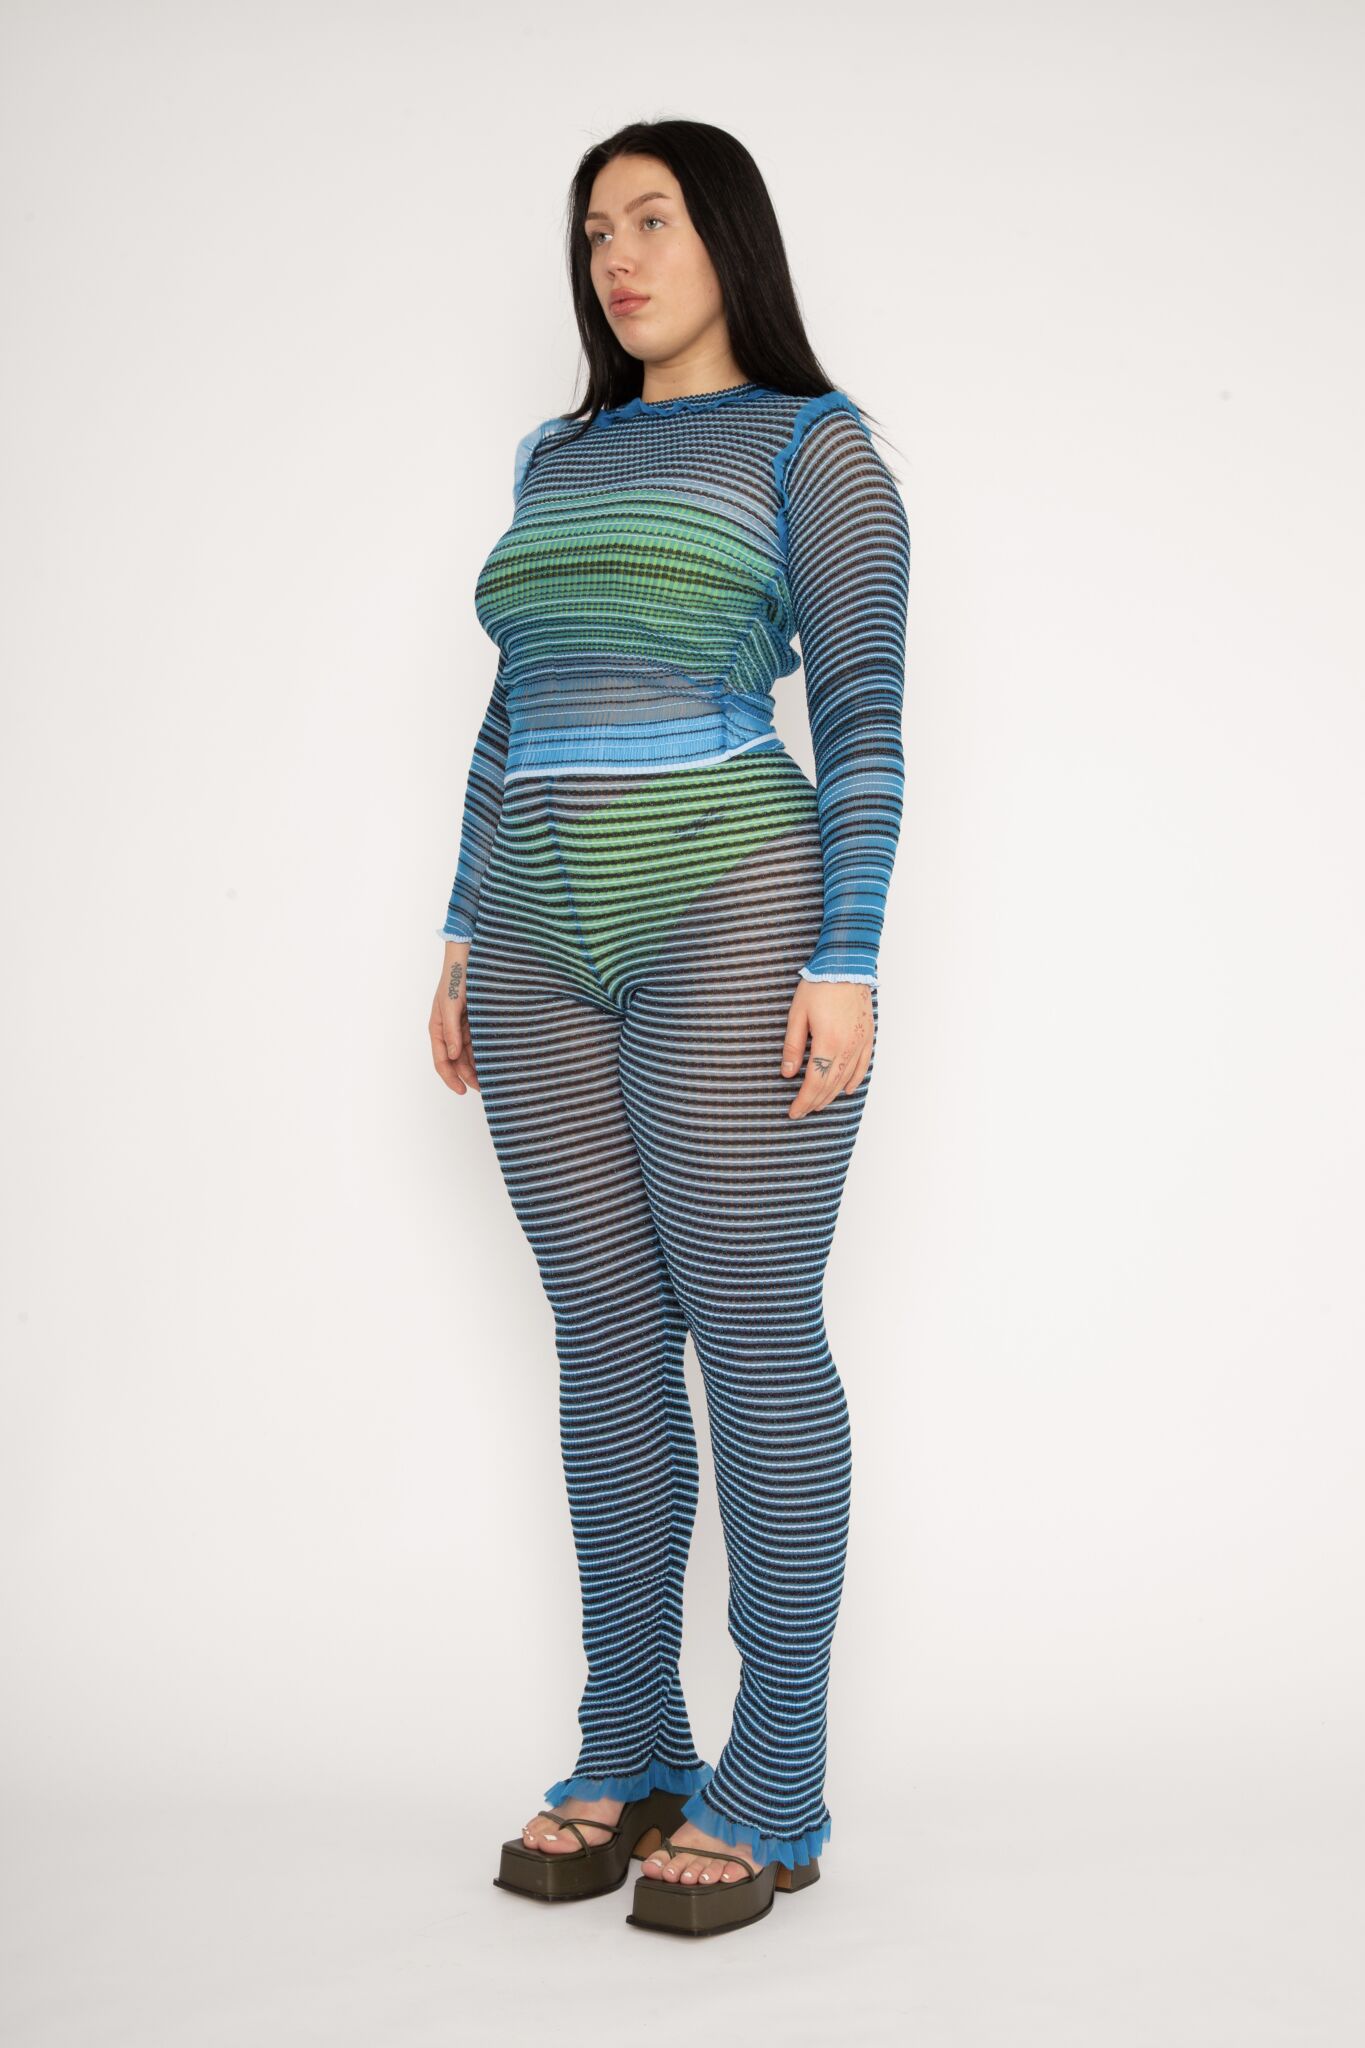 Secret Stripes knitted Jumper, top and trousers in blue and brown